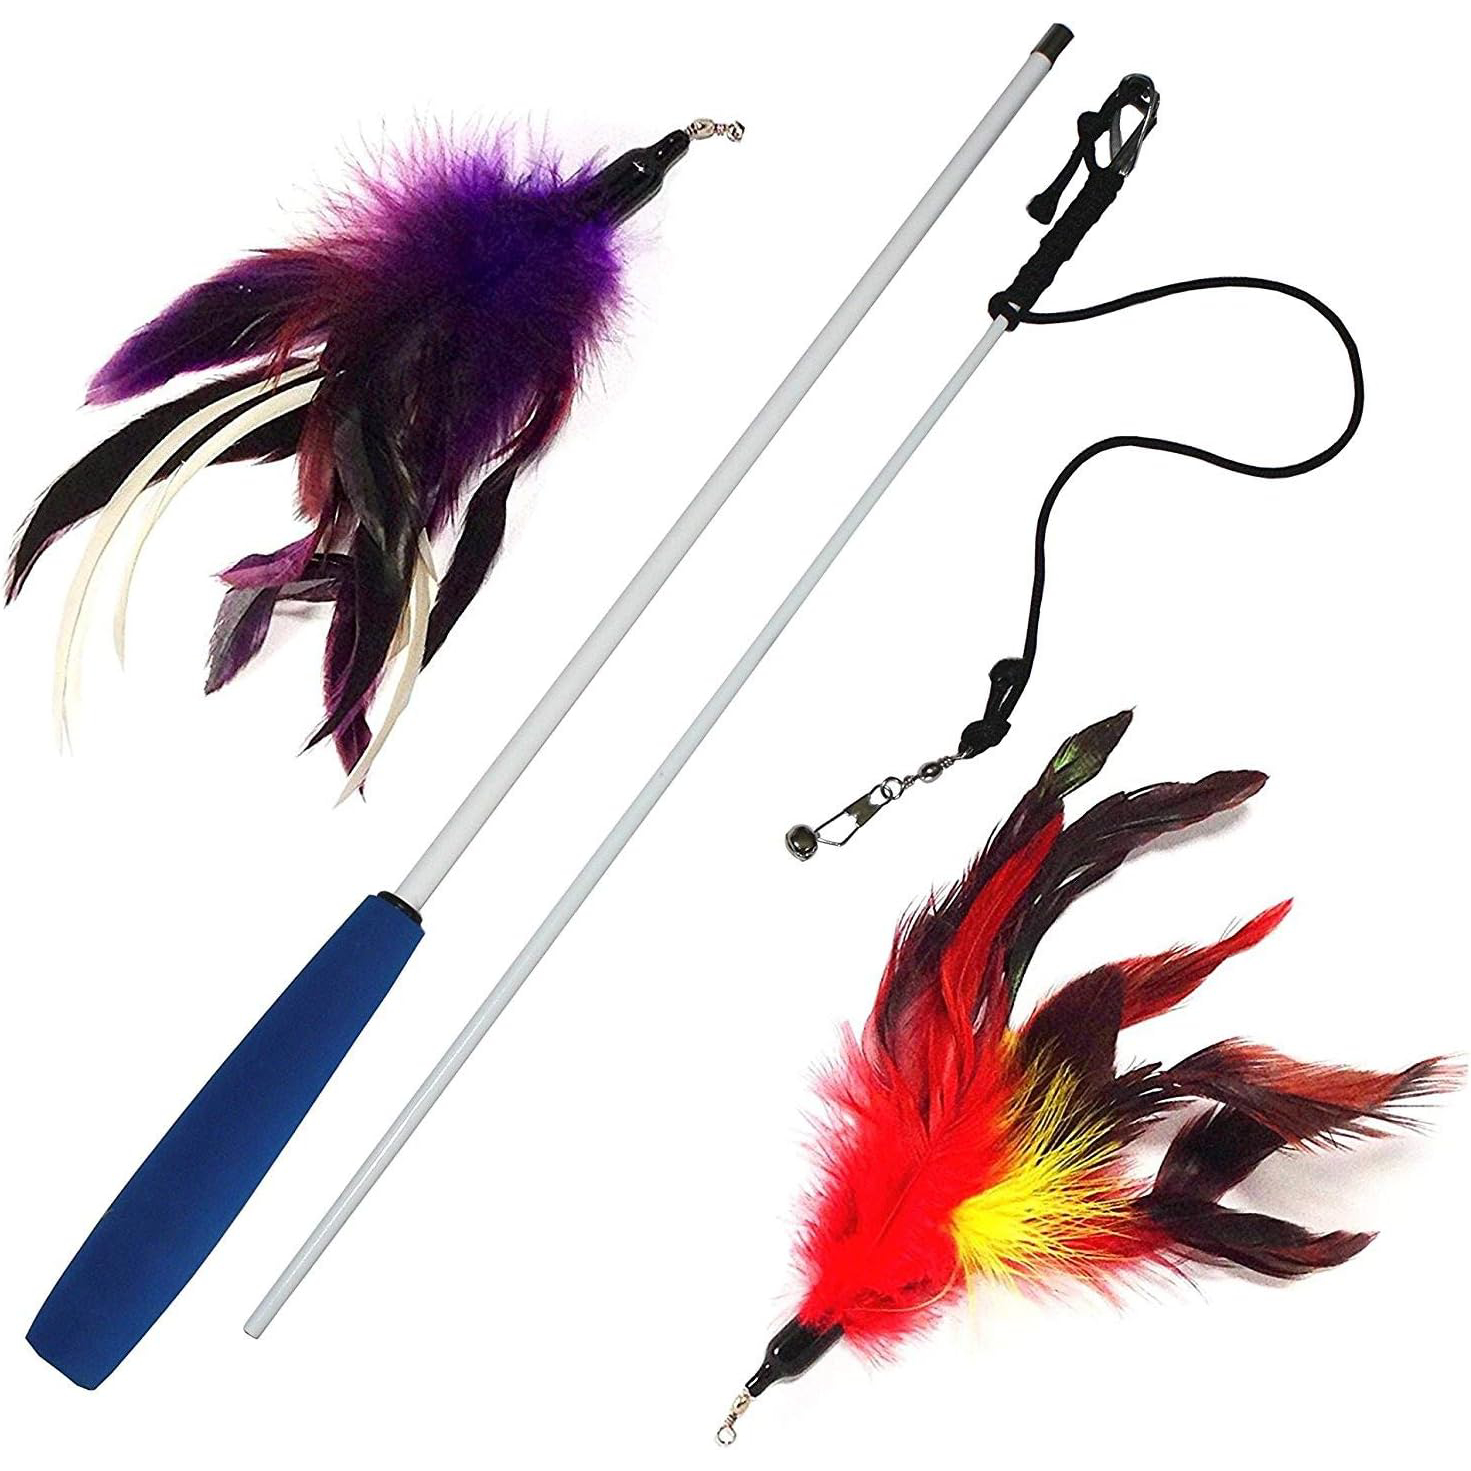 Pet Fit For Life Cat Wand Toy - Irresistible Cat Flirt Pole - Ultimate Feather Teaser for Indoor Cats - Safe & Durable for Interactive Play new